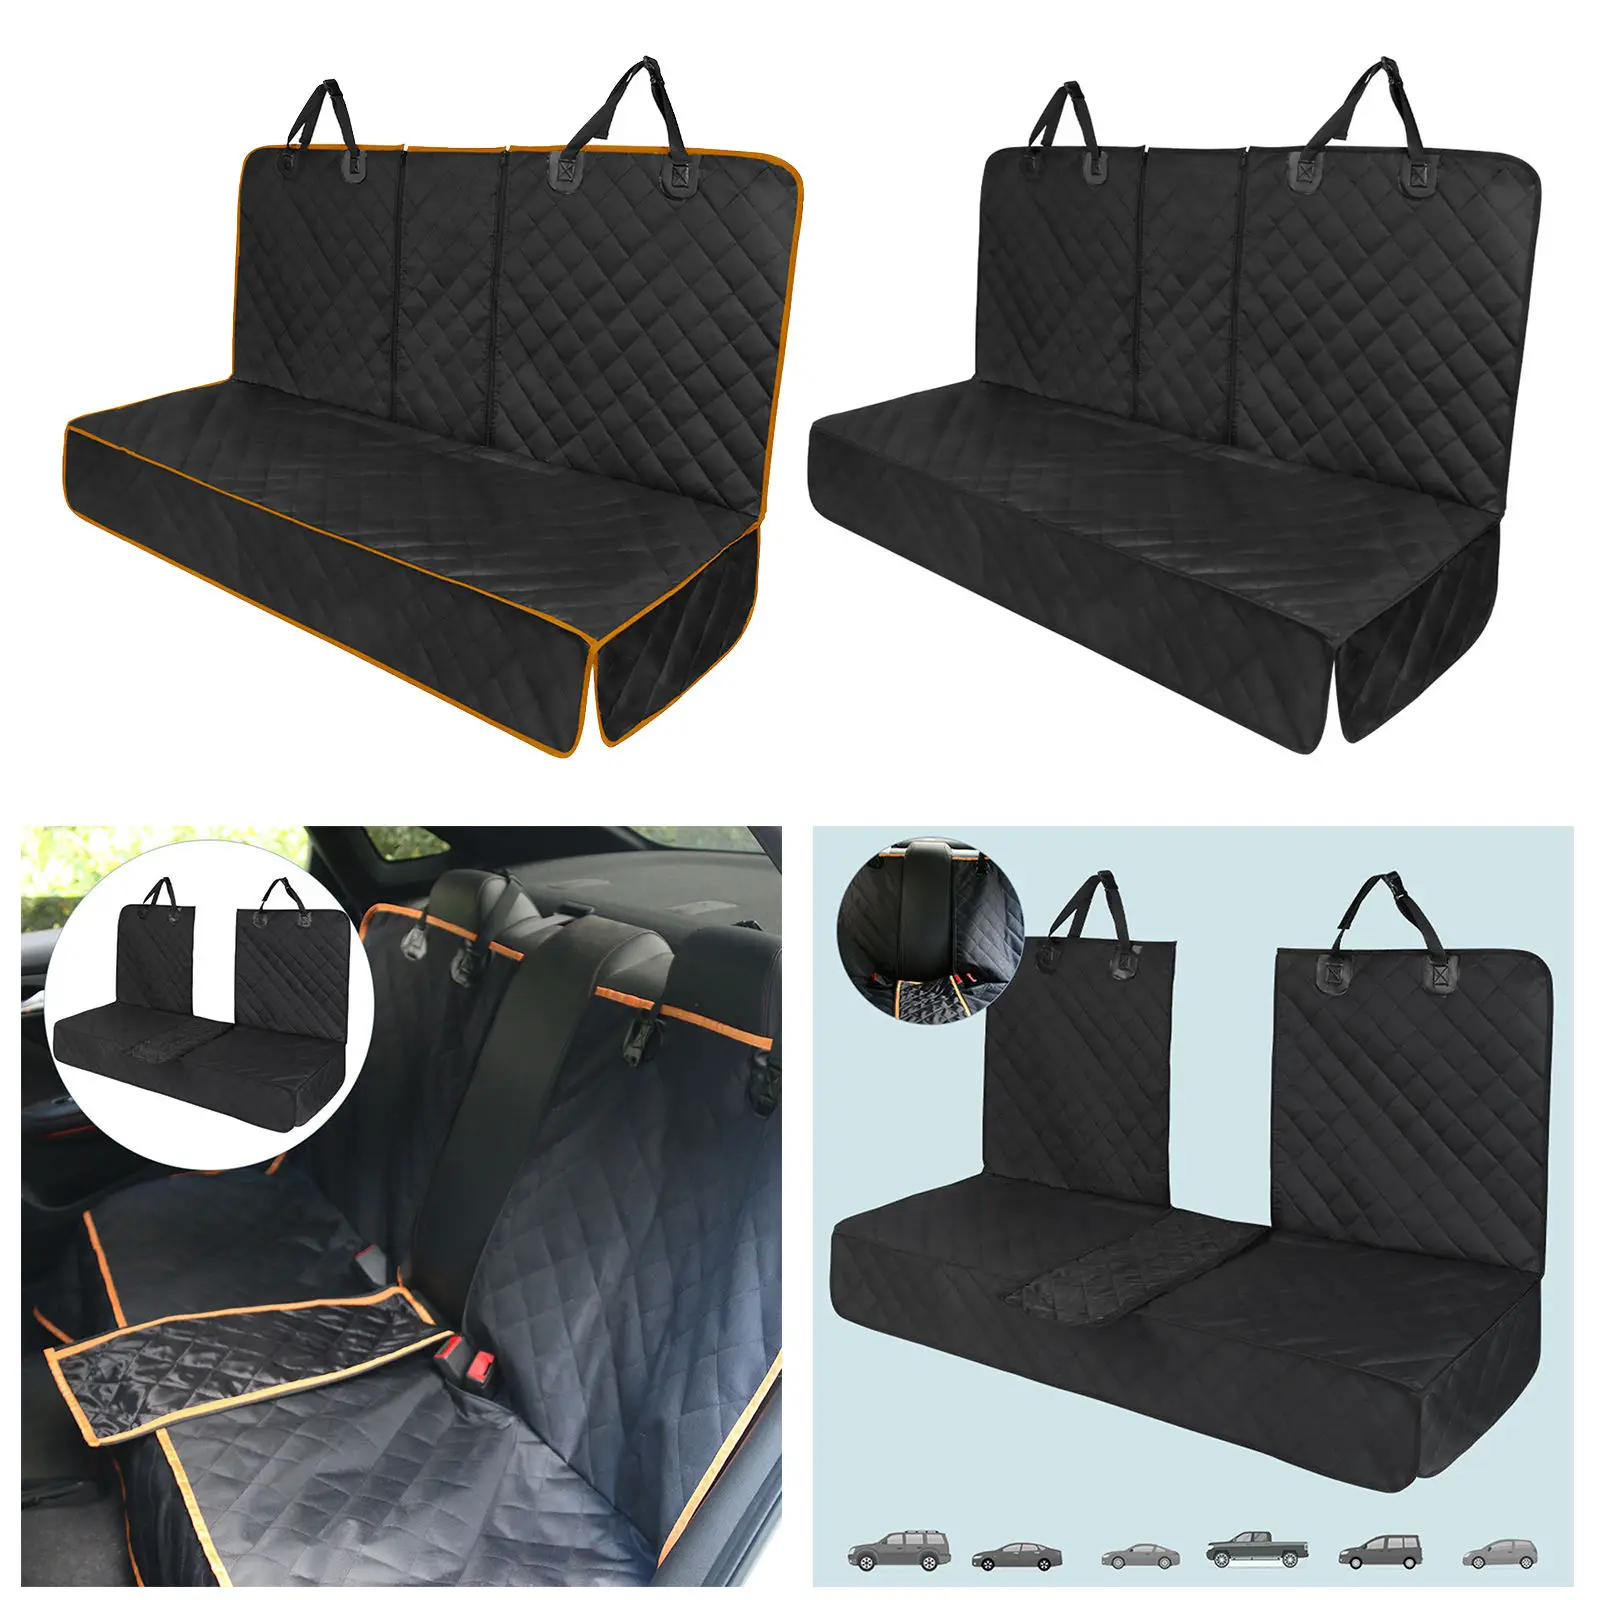 Bench Dog Car Seat Cover for Back Seat, Dog Car Seat Covers, Heavy-Duty & Nonslip Back Seat Cover for Dogs,Pet Car Seat Cover